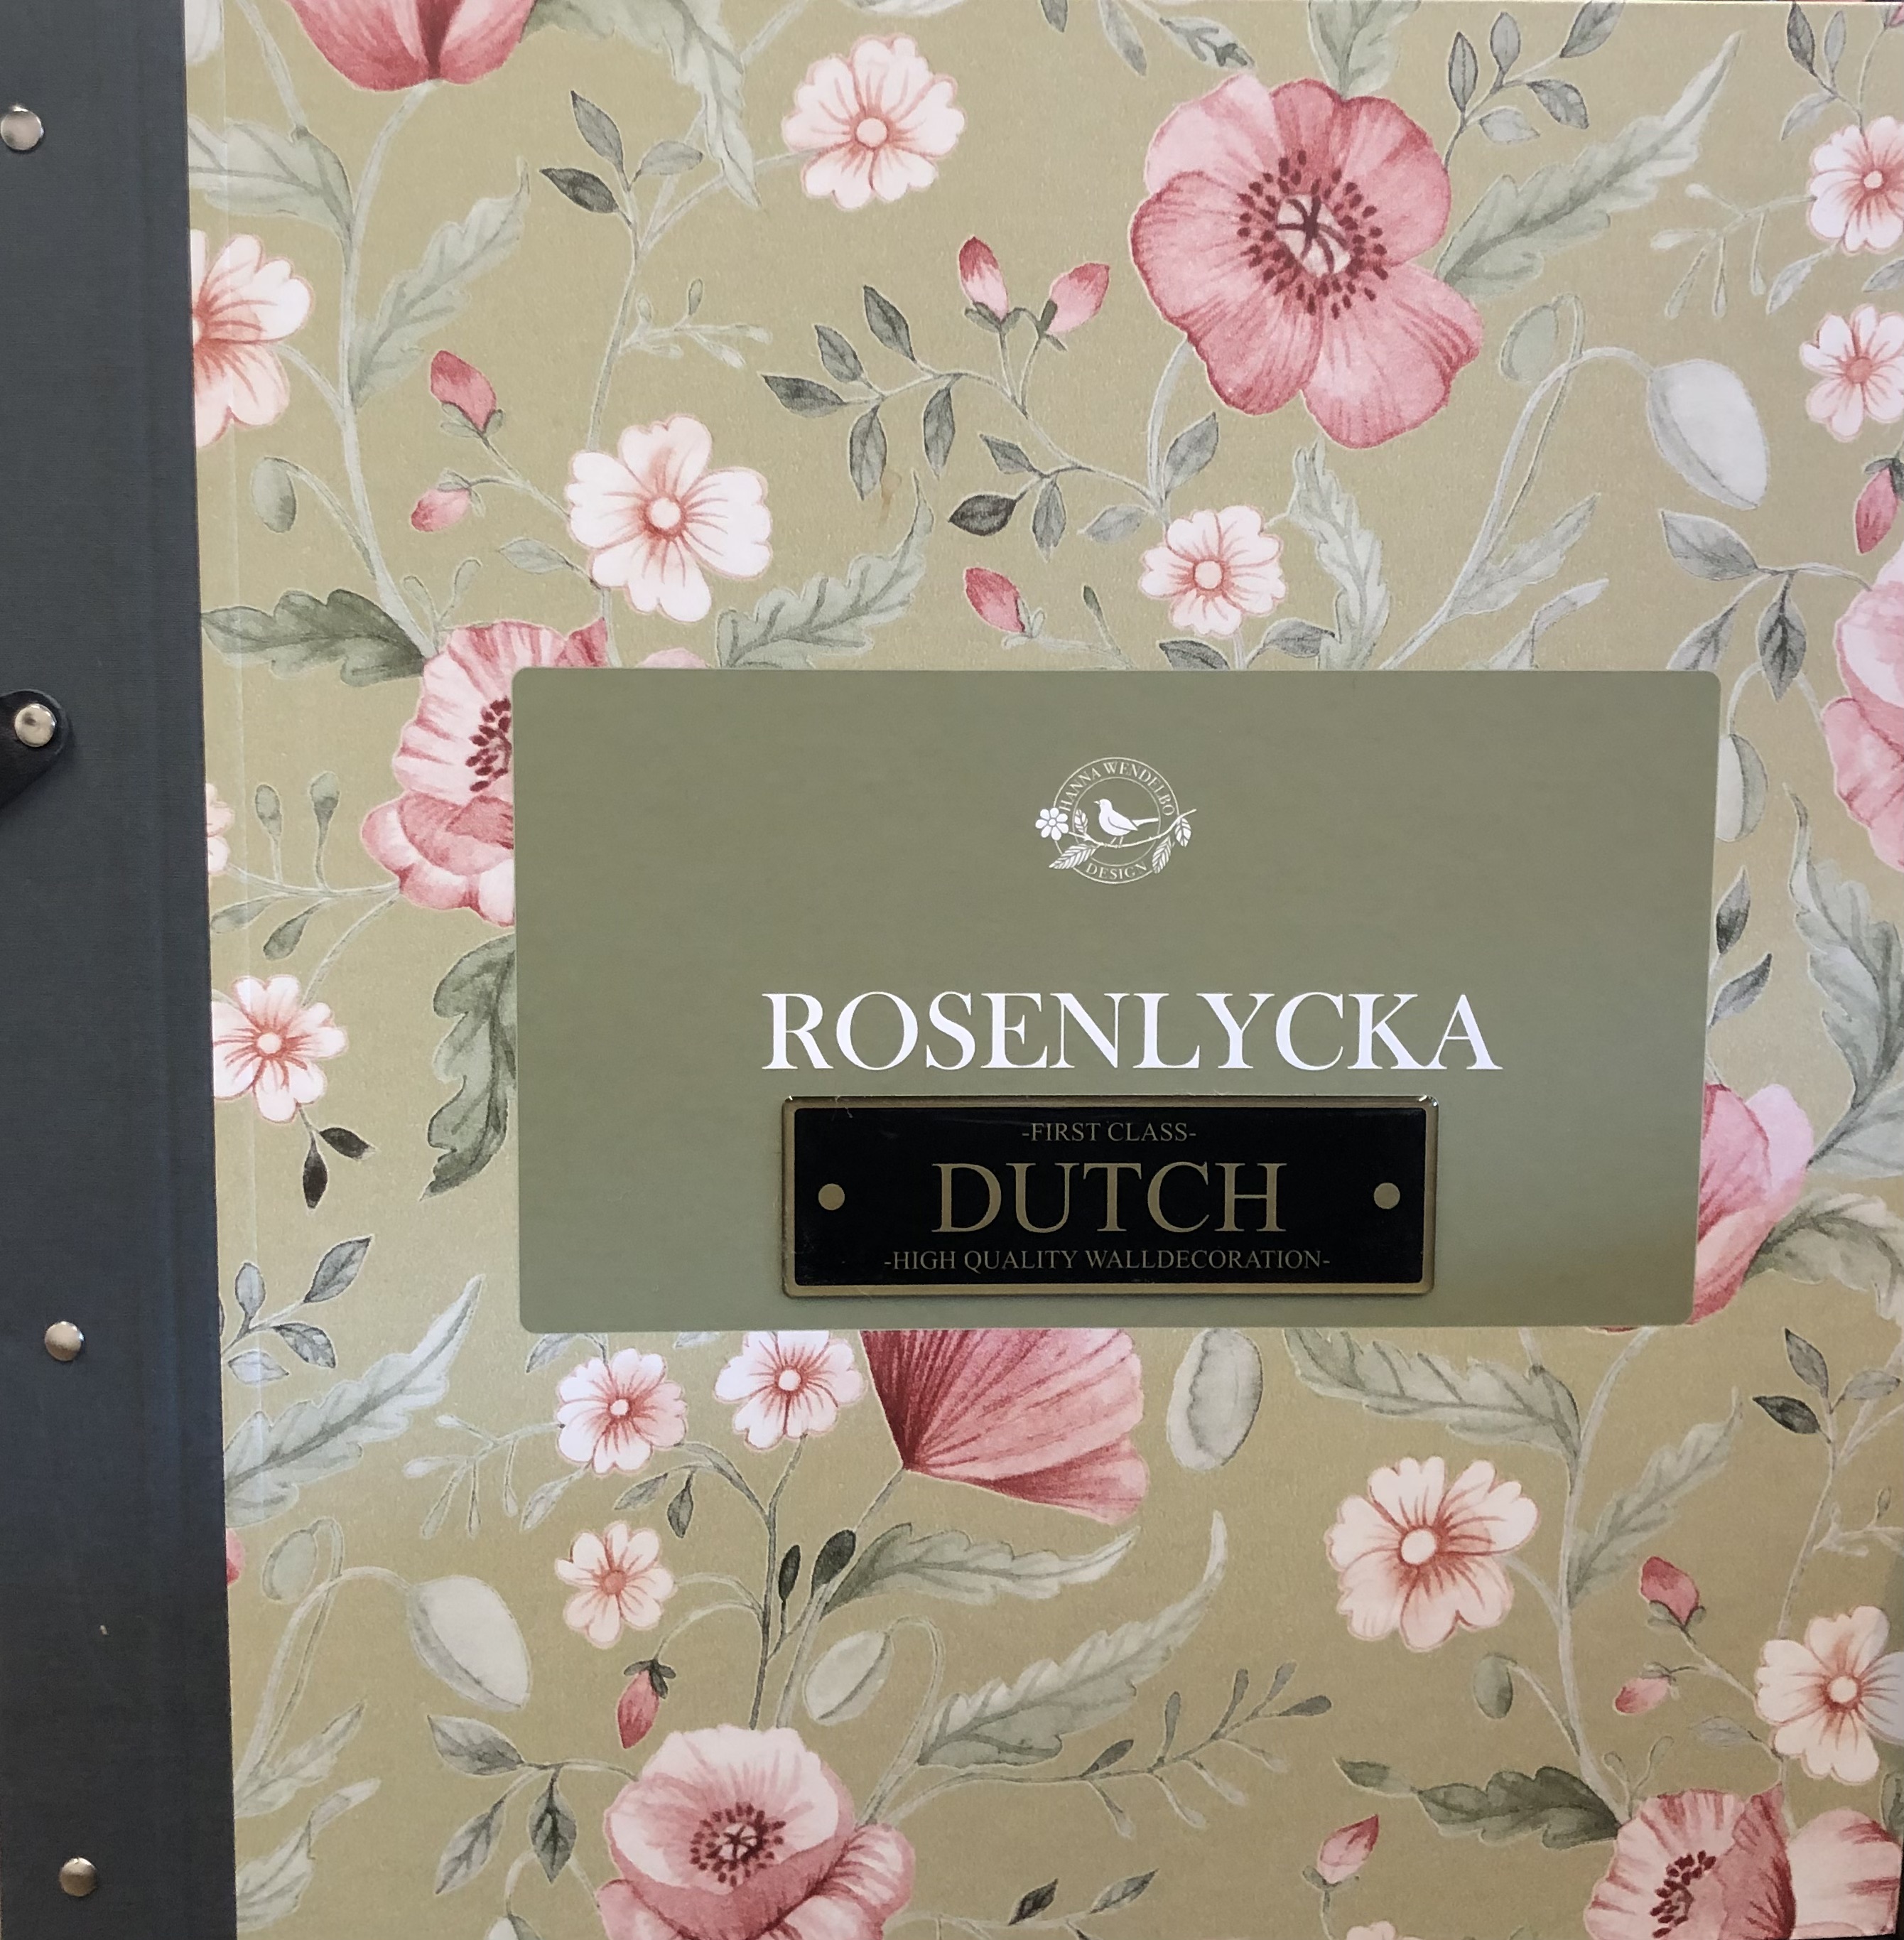 Muster - Rosenlycka - Dutch Wallcoverings First Class